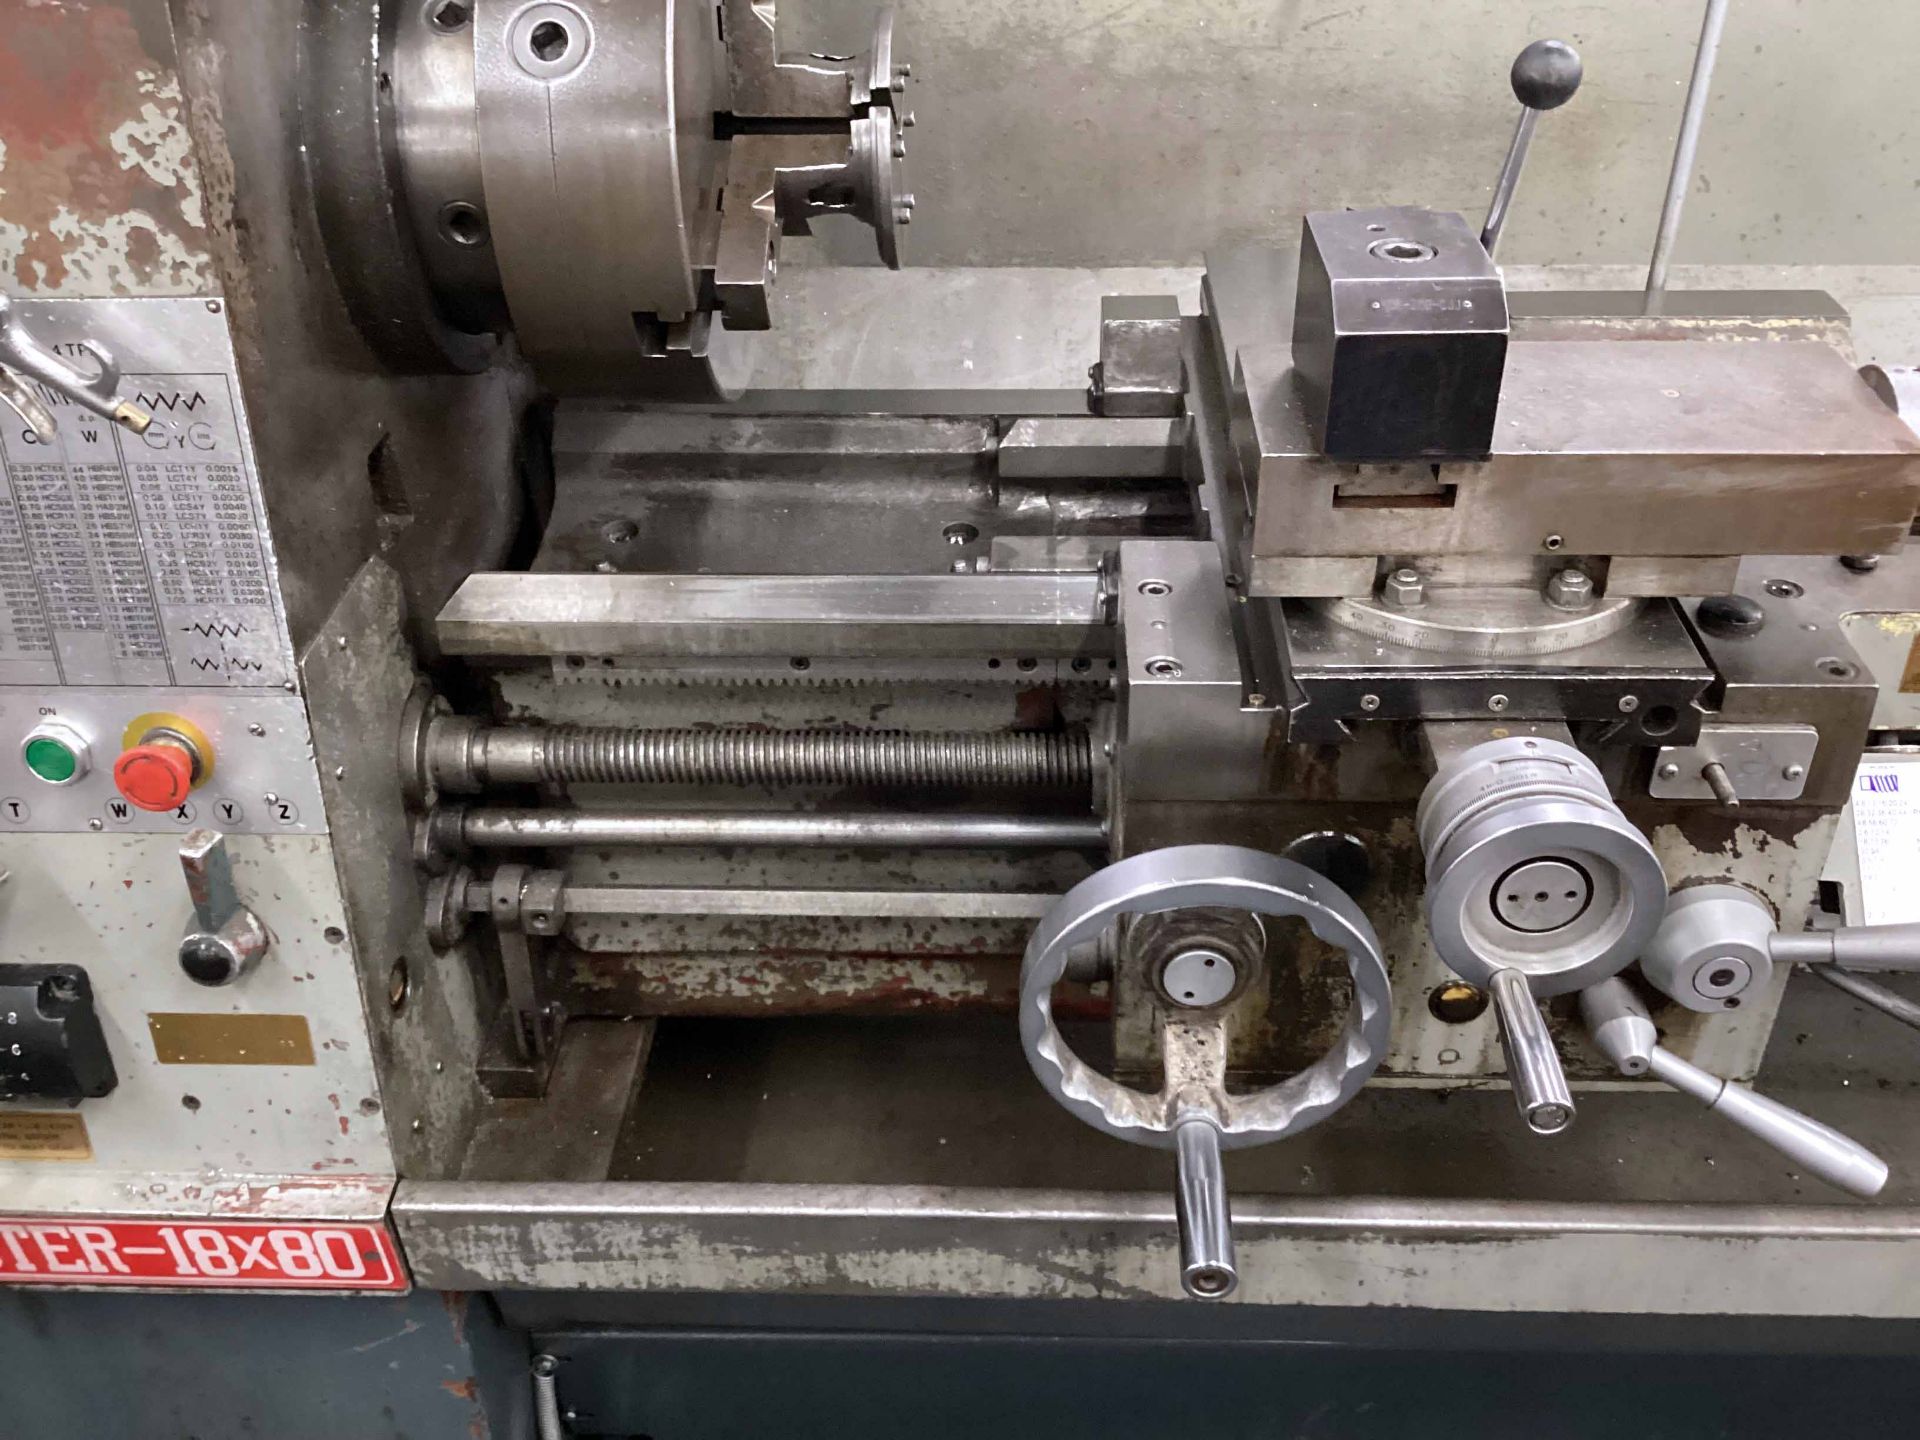 American Turnmaster Geared Engine Lathe 18x80 - Image 3 of 5